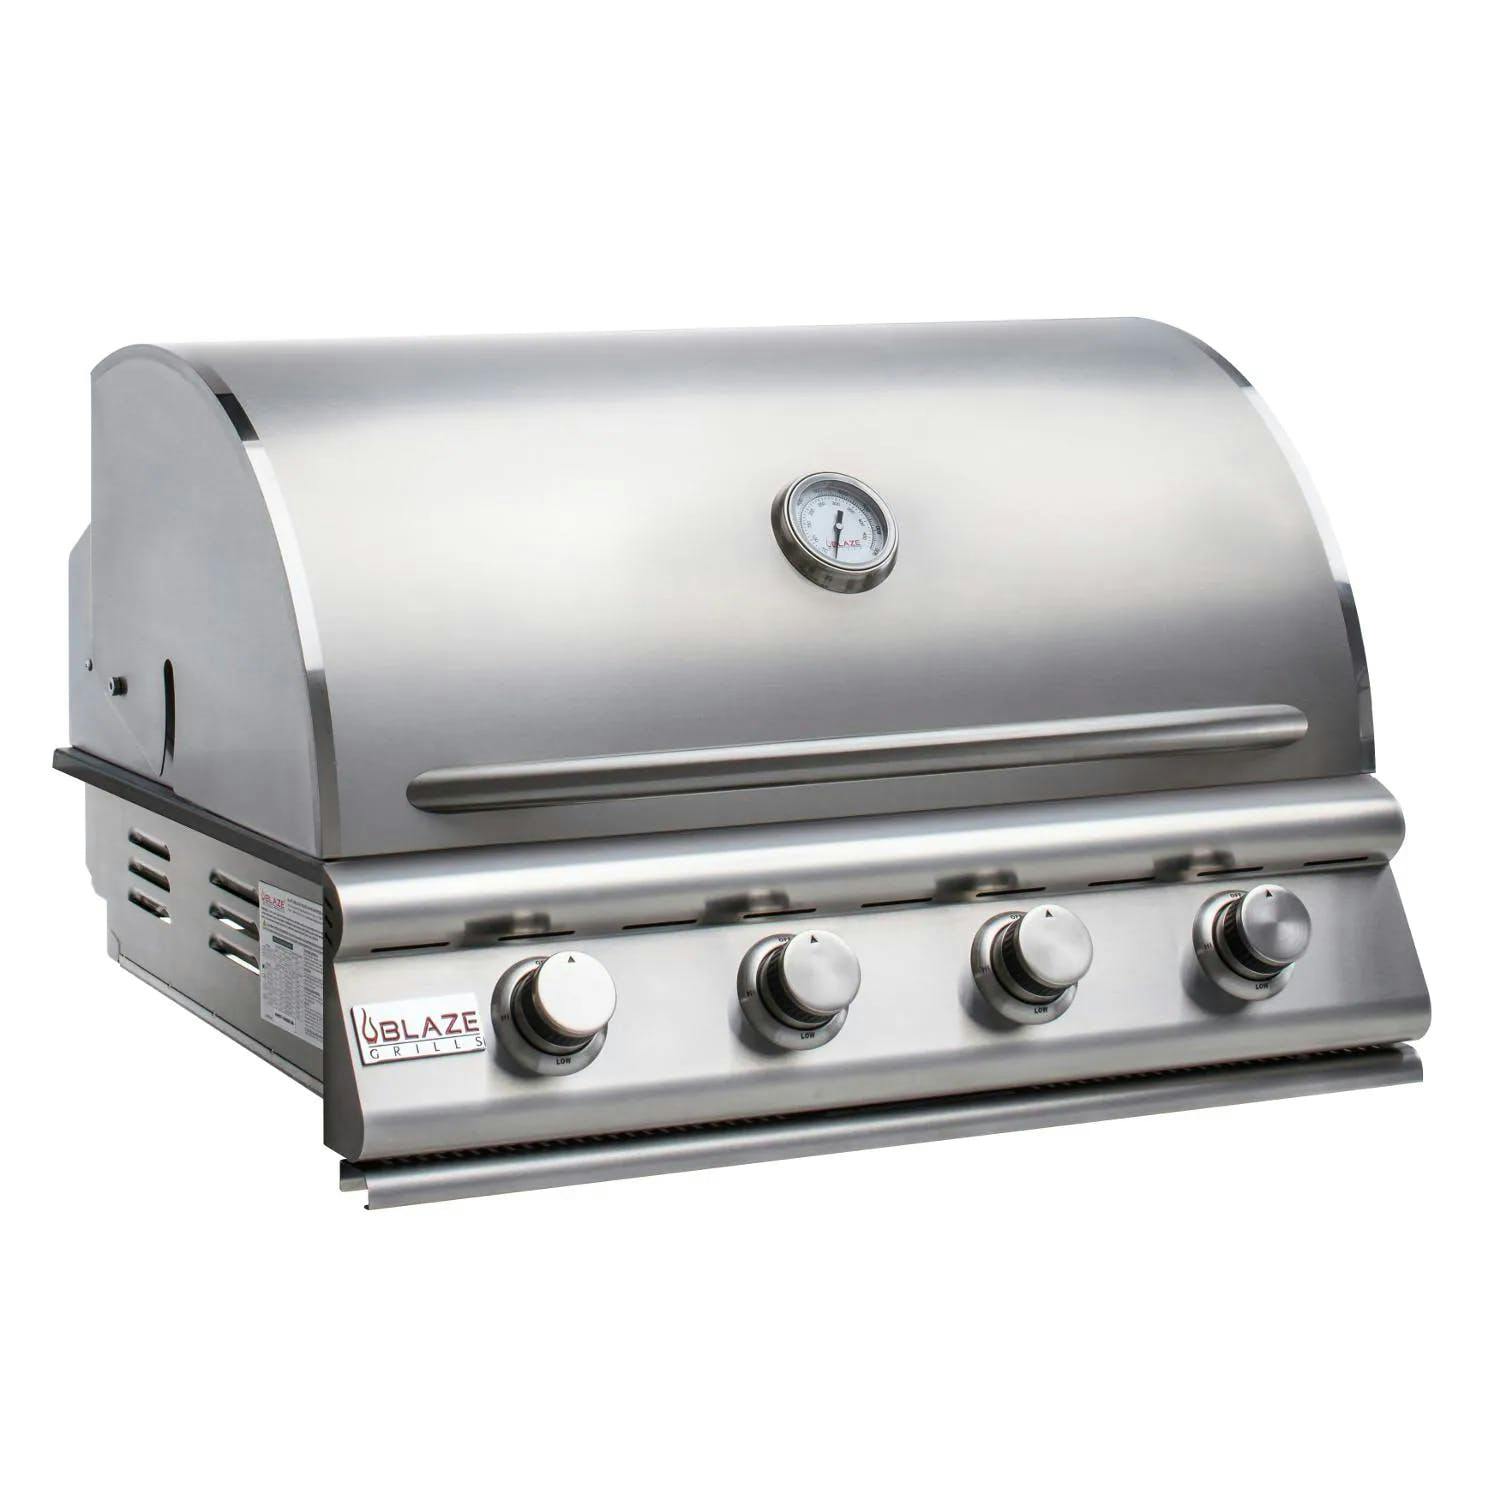 Blaze Prelude LBM Built-In Gas Grill